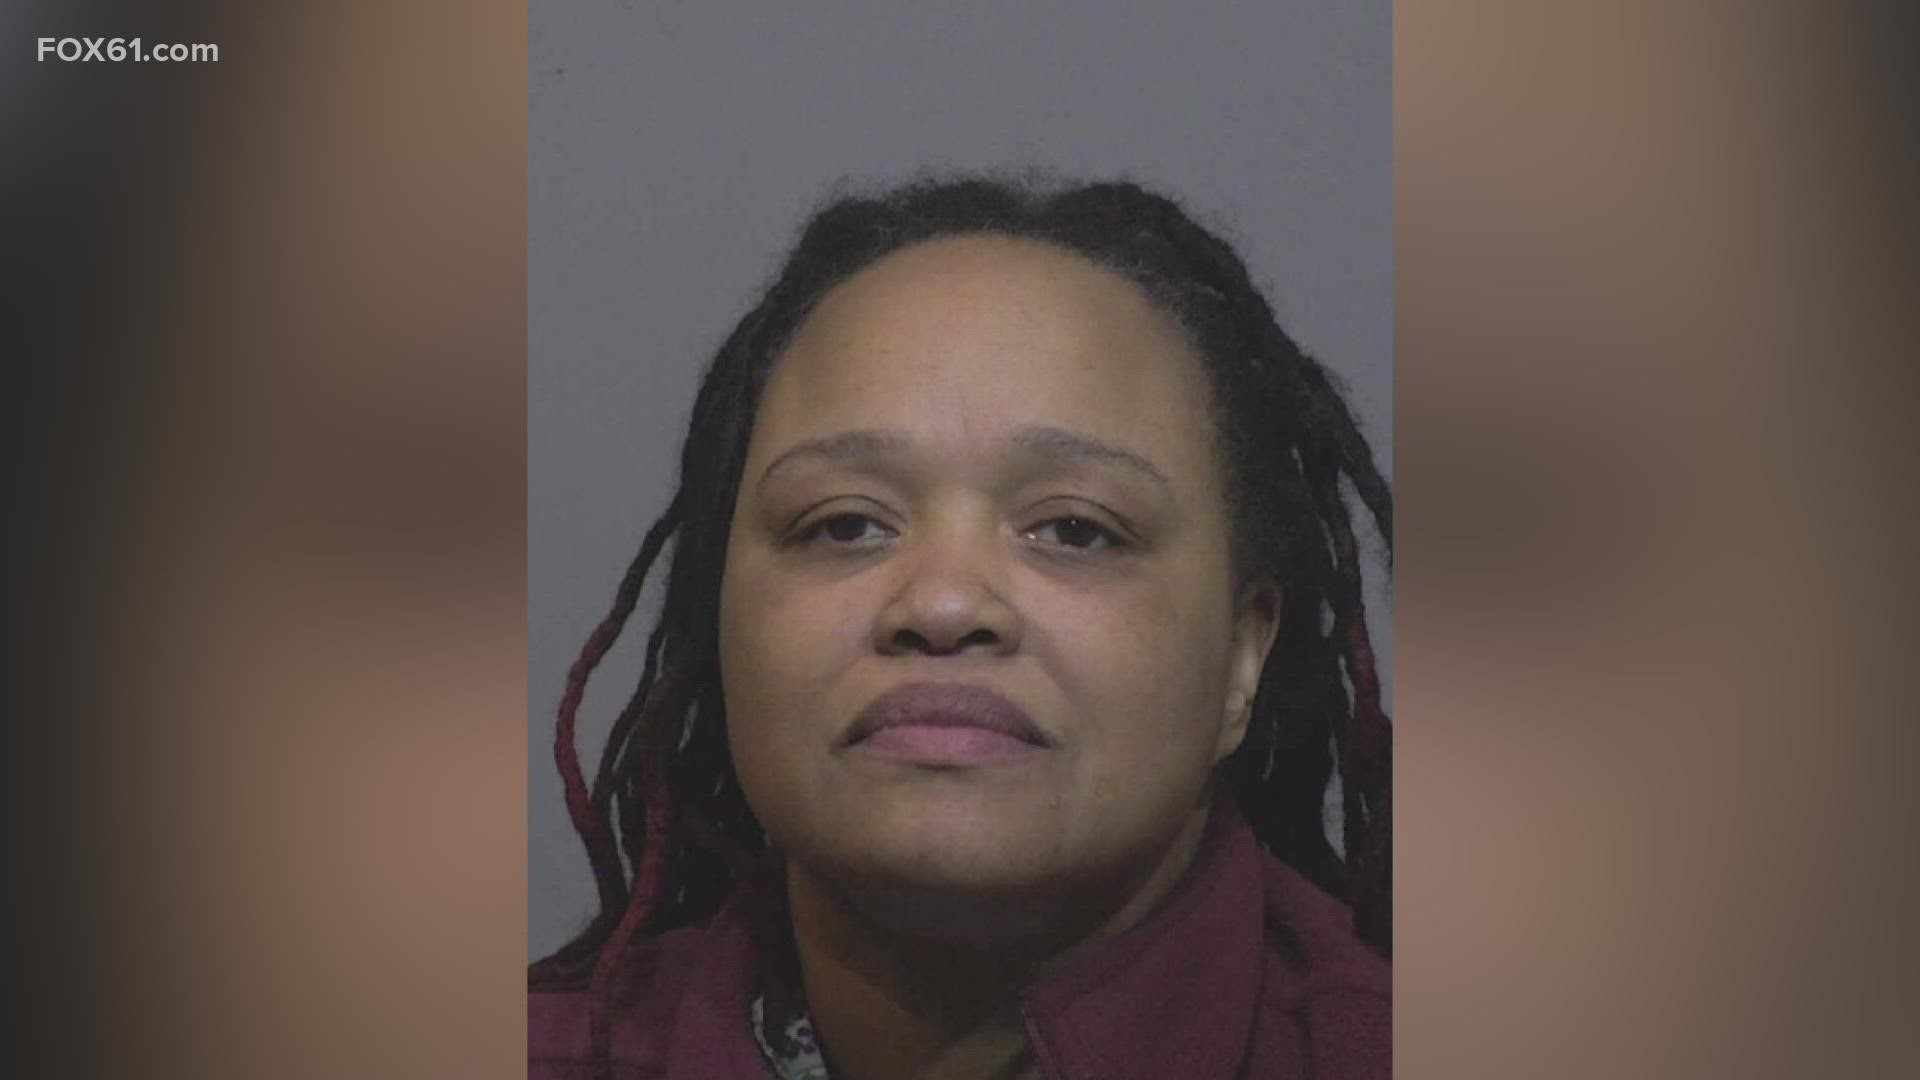 Jennifer Wells-Jackson, a 49-year-old from New Haven, was taken into custody after police officers were dispatched to King Robinson Magnet School.